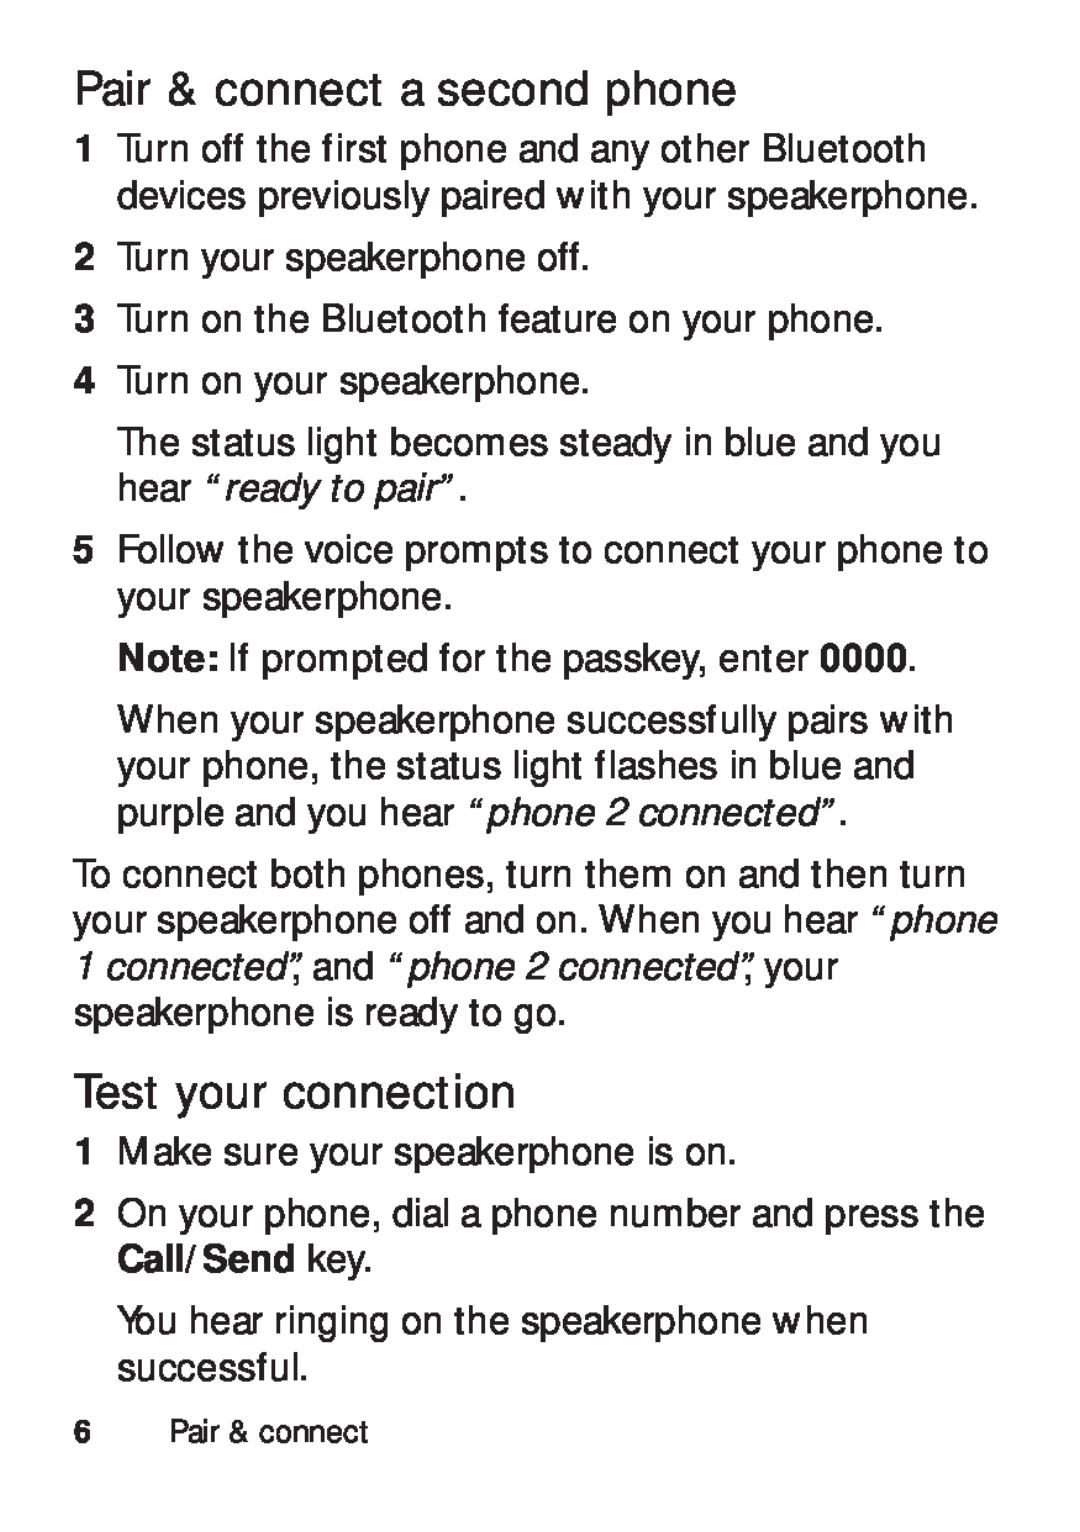 Motorola TX500 manual Pair & connect a second phone, Test your connection 